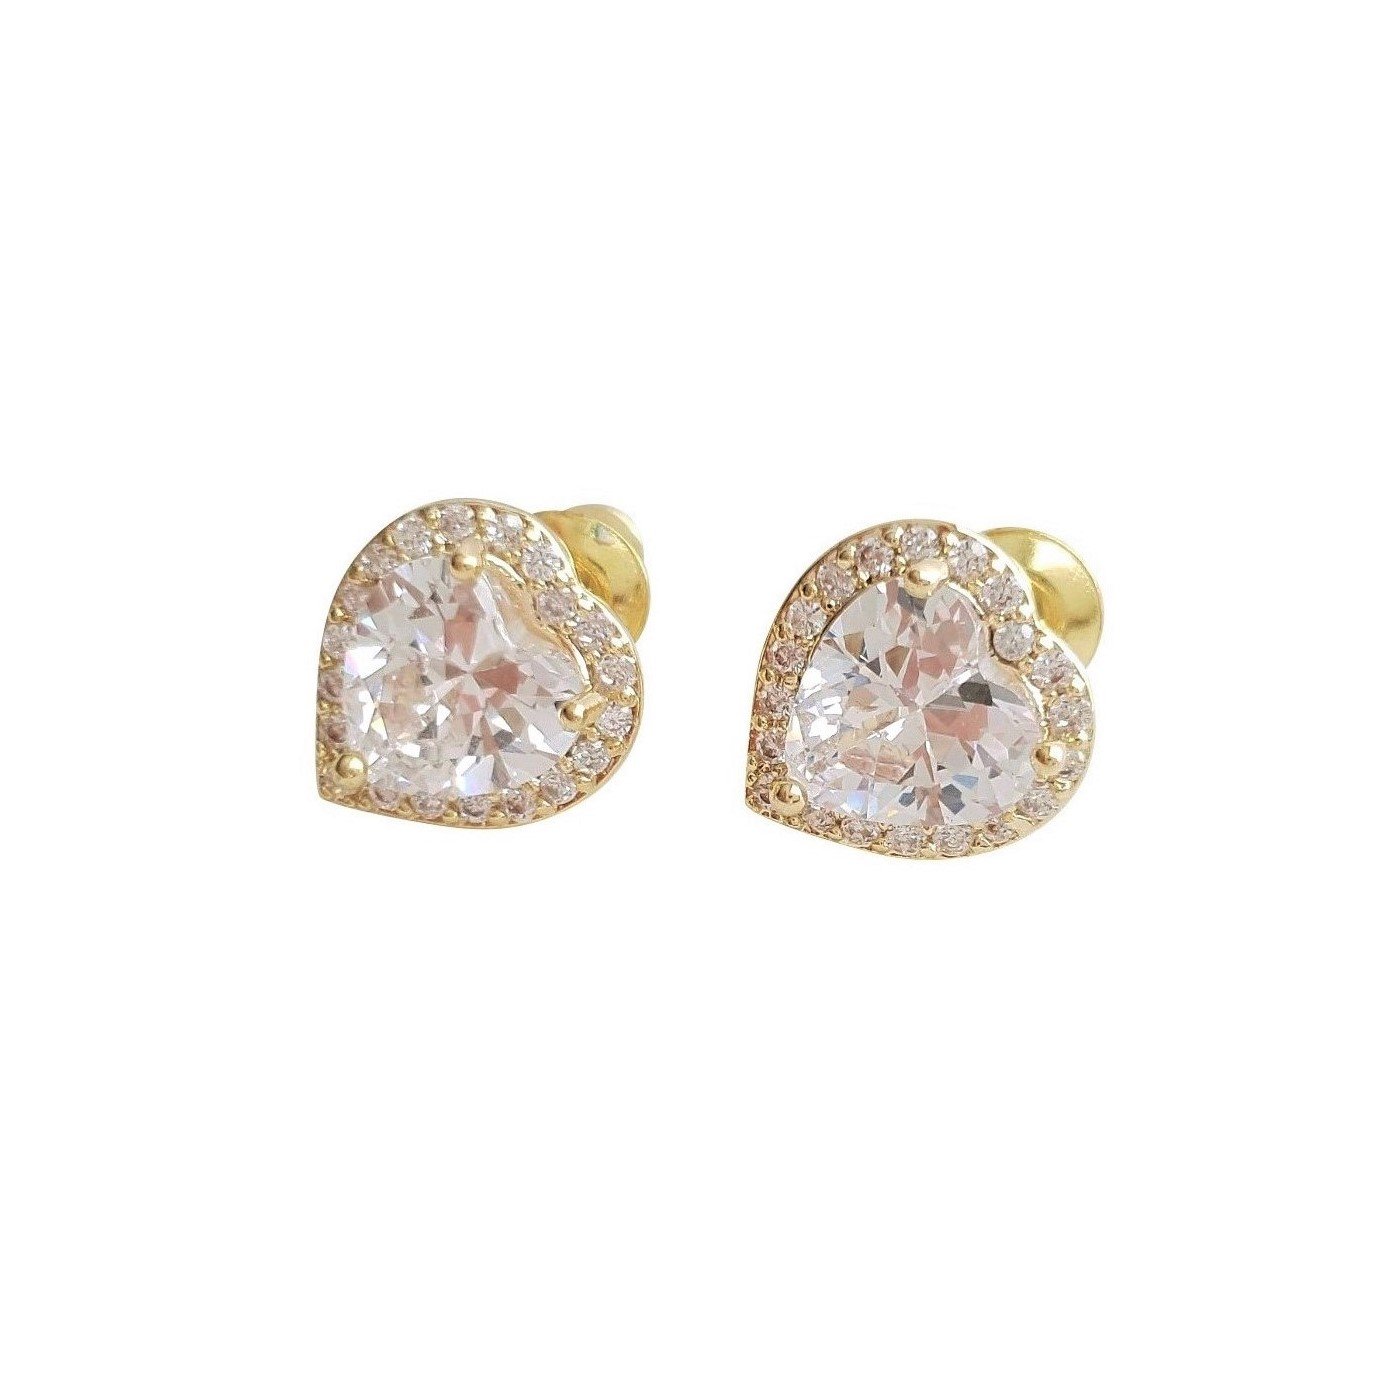 Cubic Zirconia Heart Earrings for Bridesmaids-Diana - PoetryDesigns